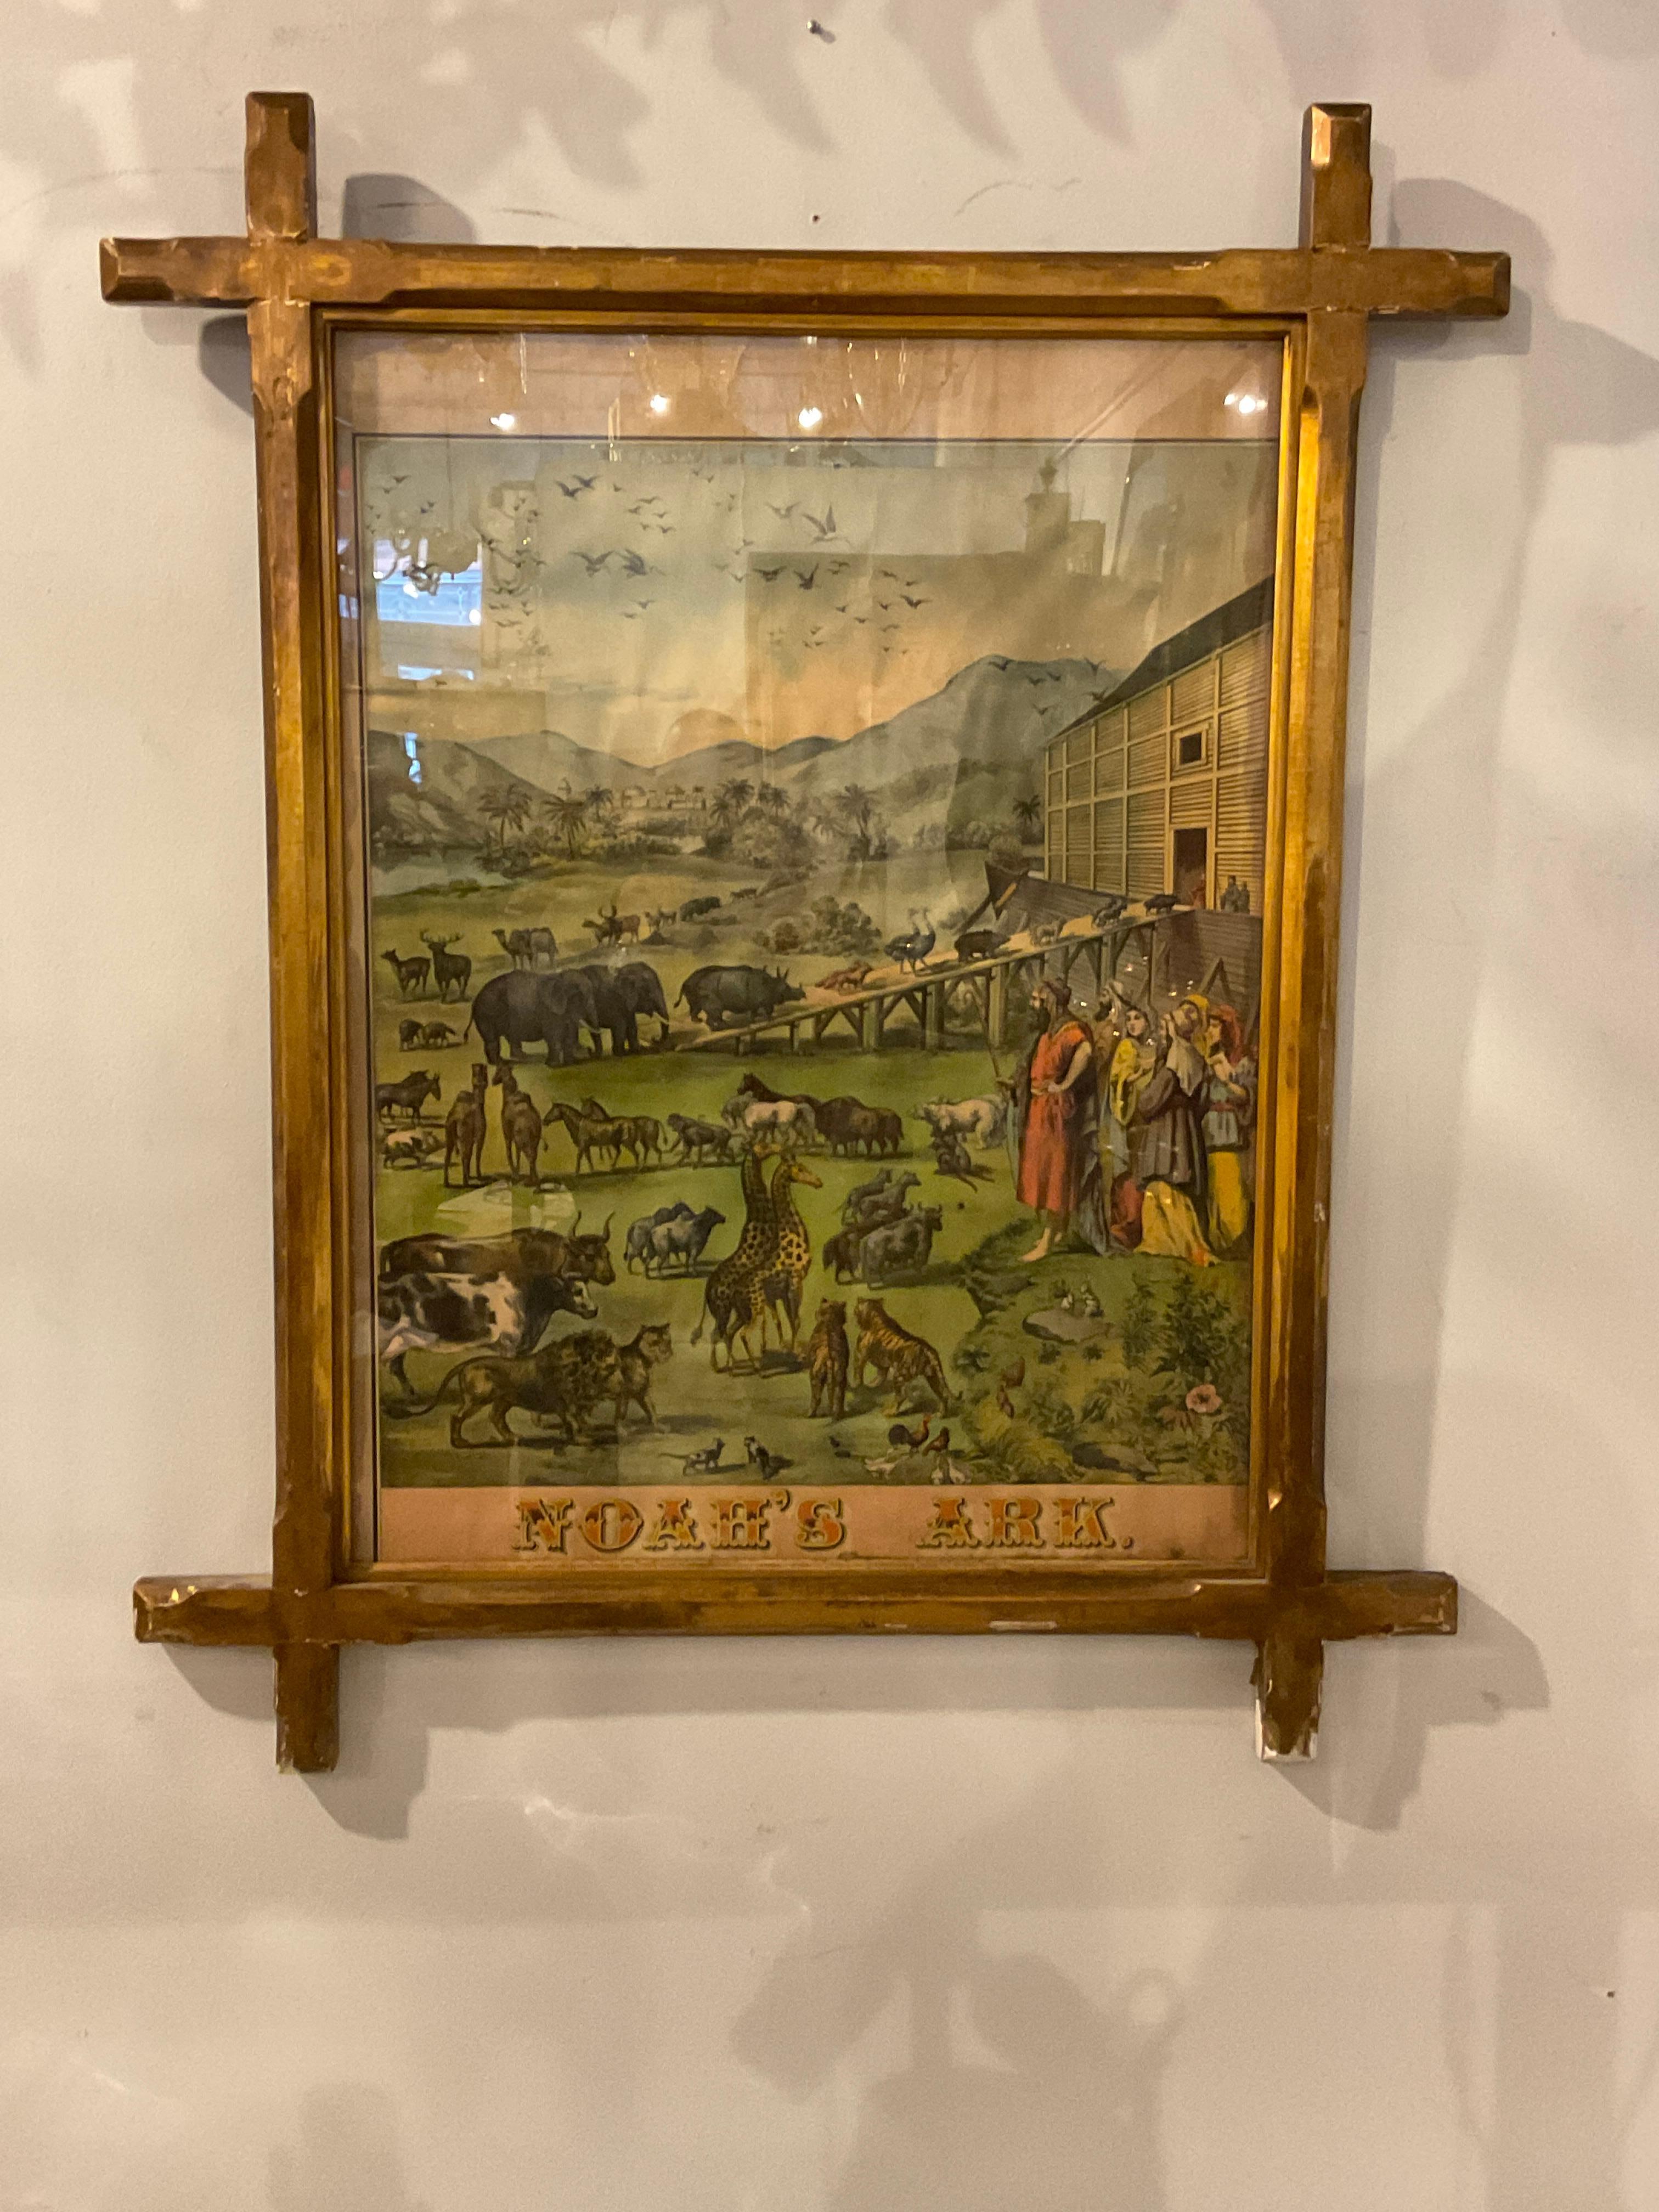 1880s Noah’s Ark print in gilt wood frame. Great images, great color.